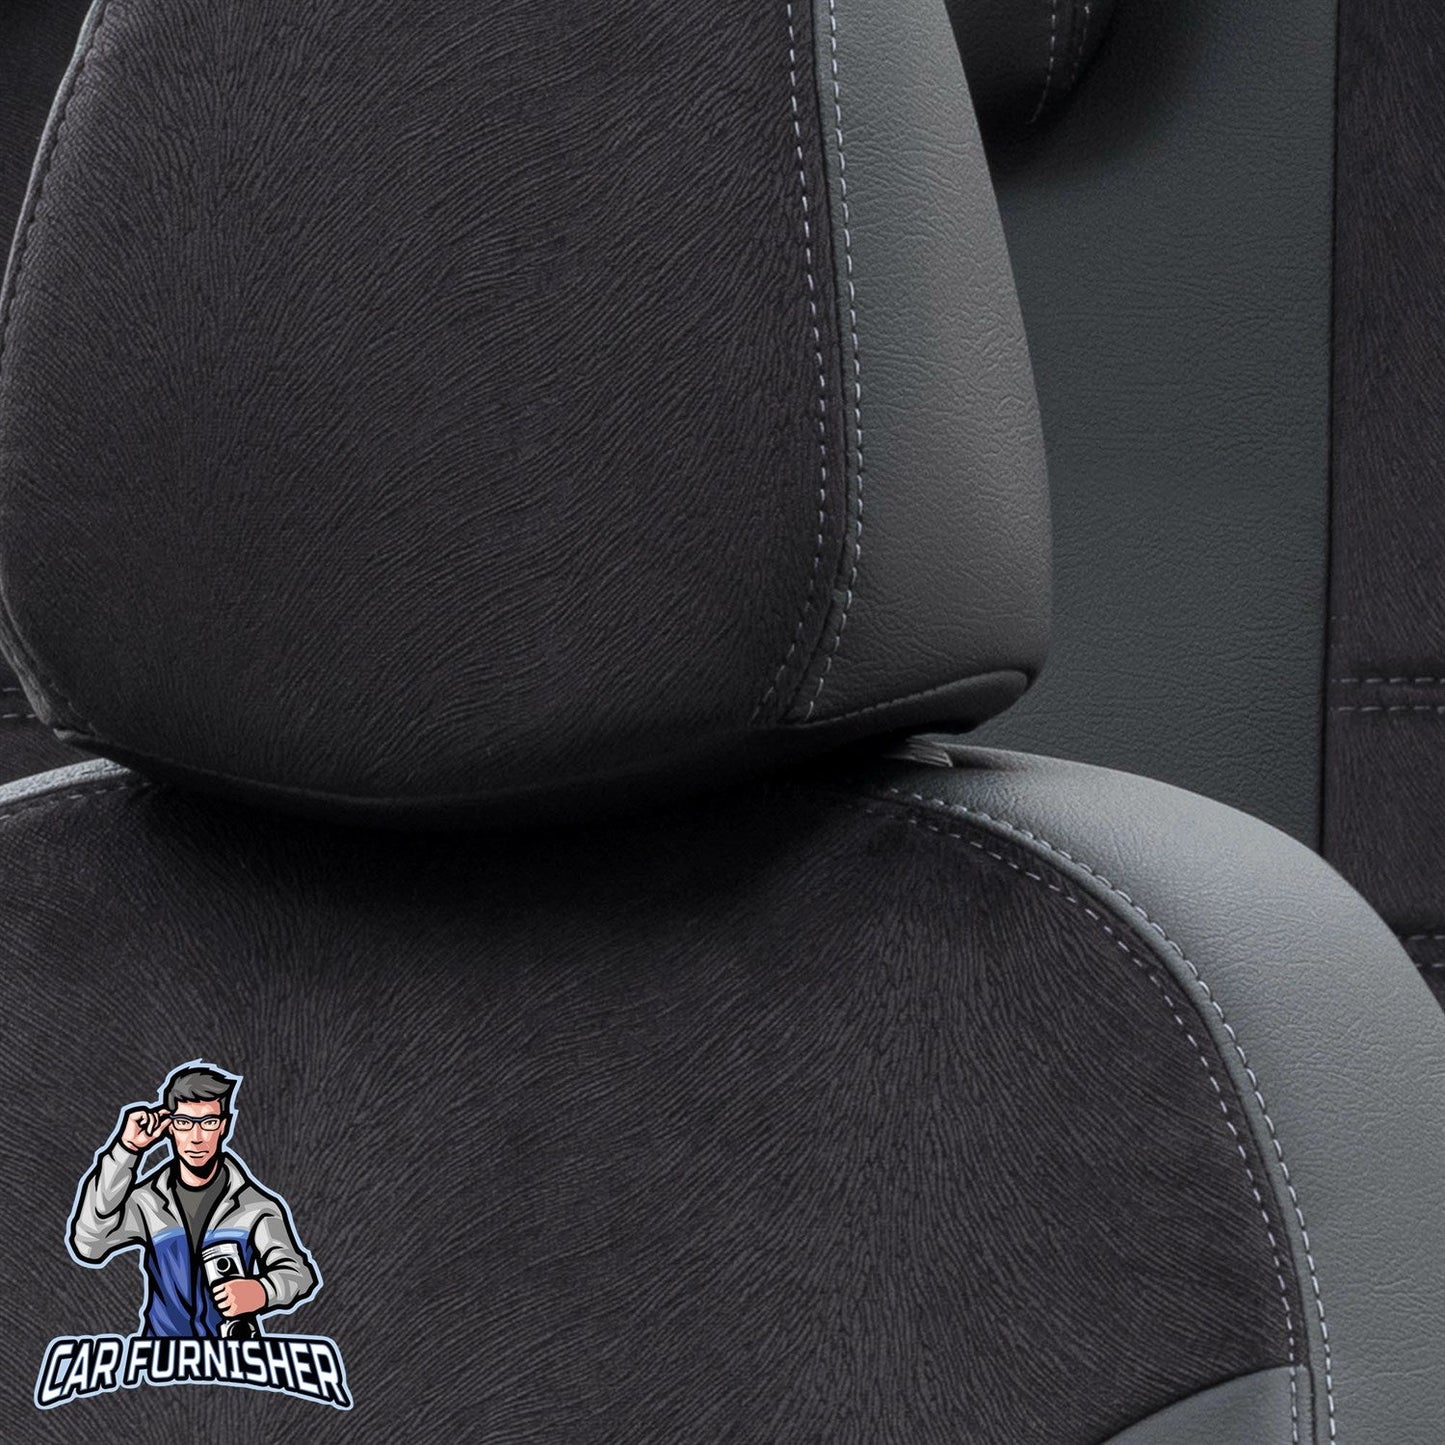 Kia XCeed Seat Covers London Foal Feather Design Black Leather & Foal Feather